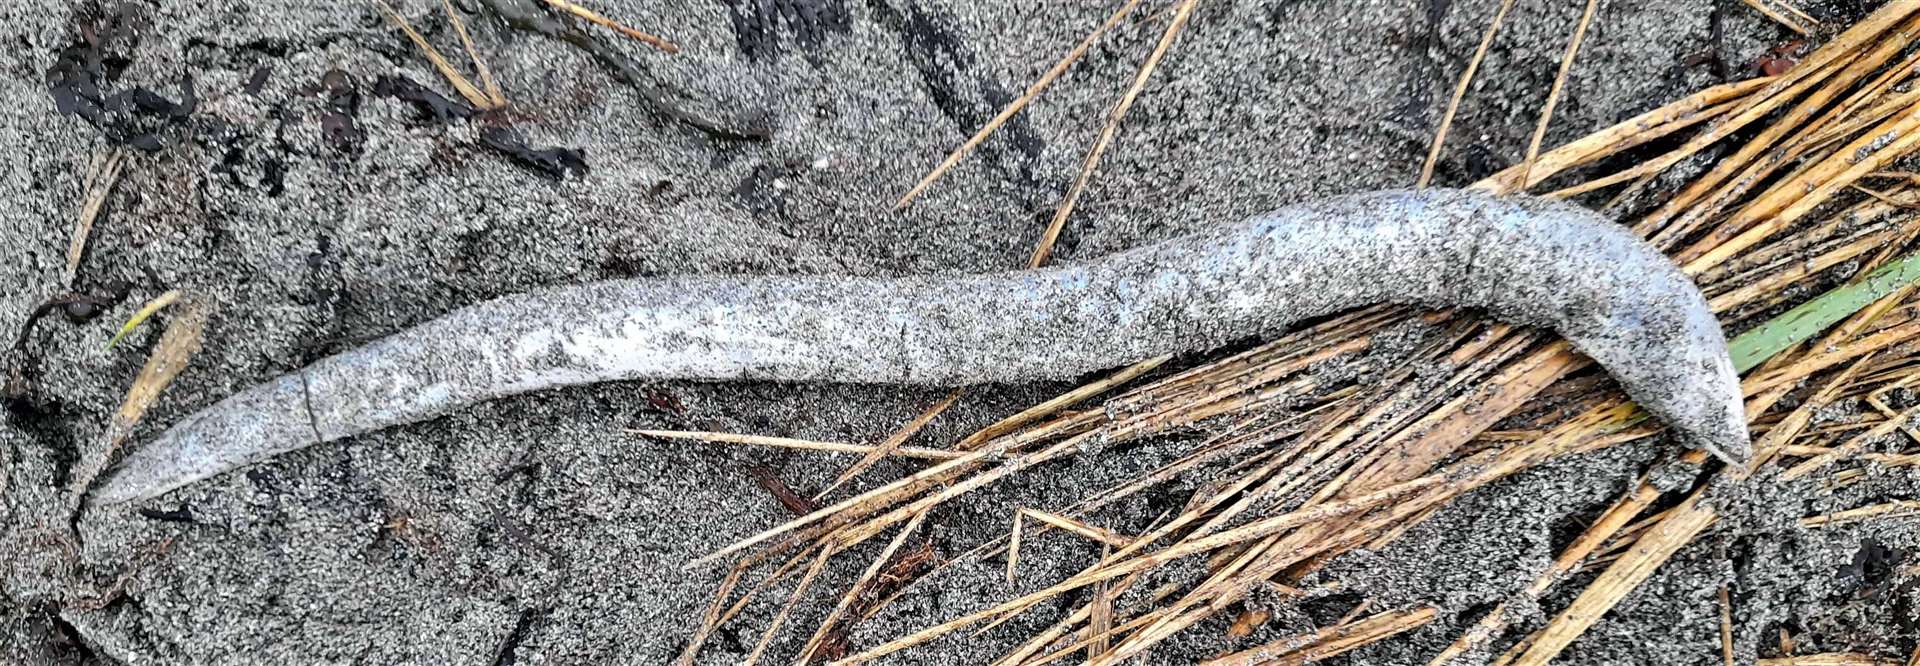 The Caithness beach cleaning duo found this strange creature on the shore at Freswick. Could it be a conger eel? Pictures: Dorcas Sinclair